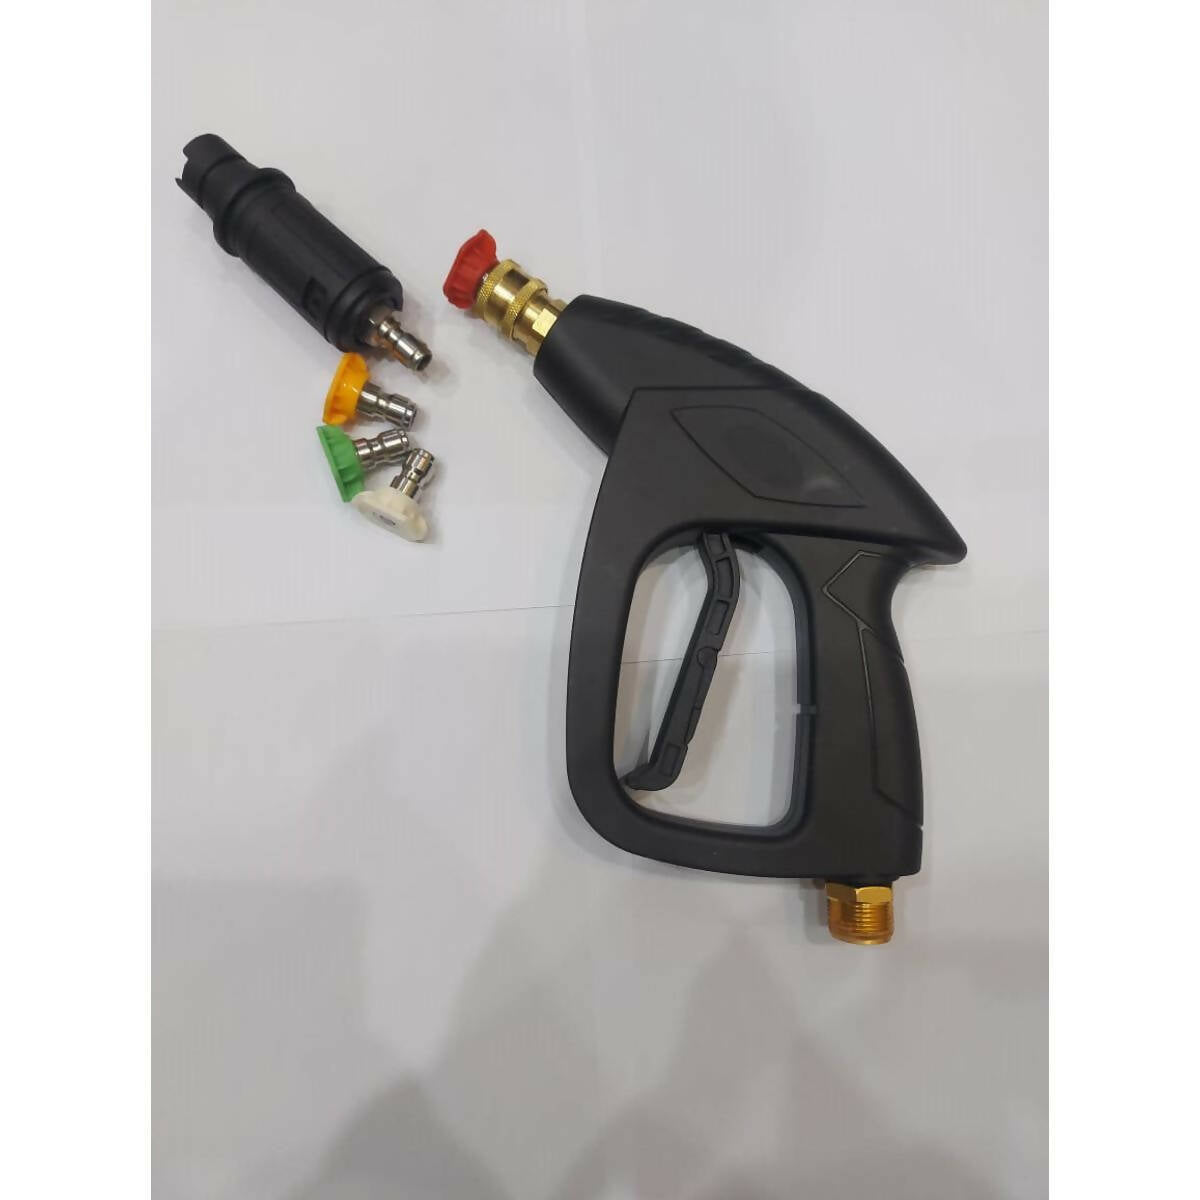 Short Gun For Pressure Washers With 1/4 Quick Connector 4 Spray Nozzles Quick Connect Tips - M22 Connector